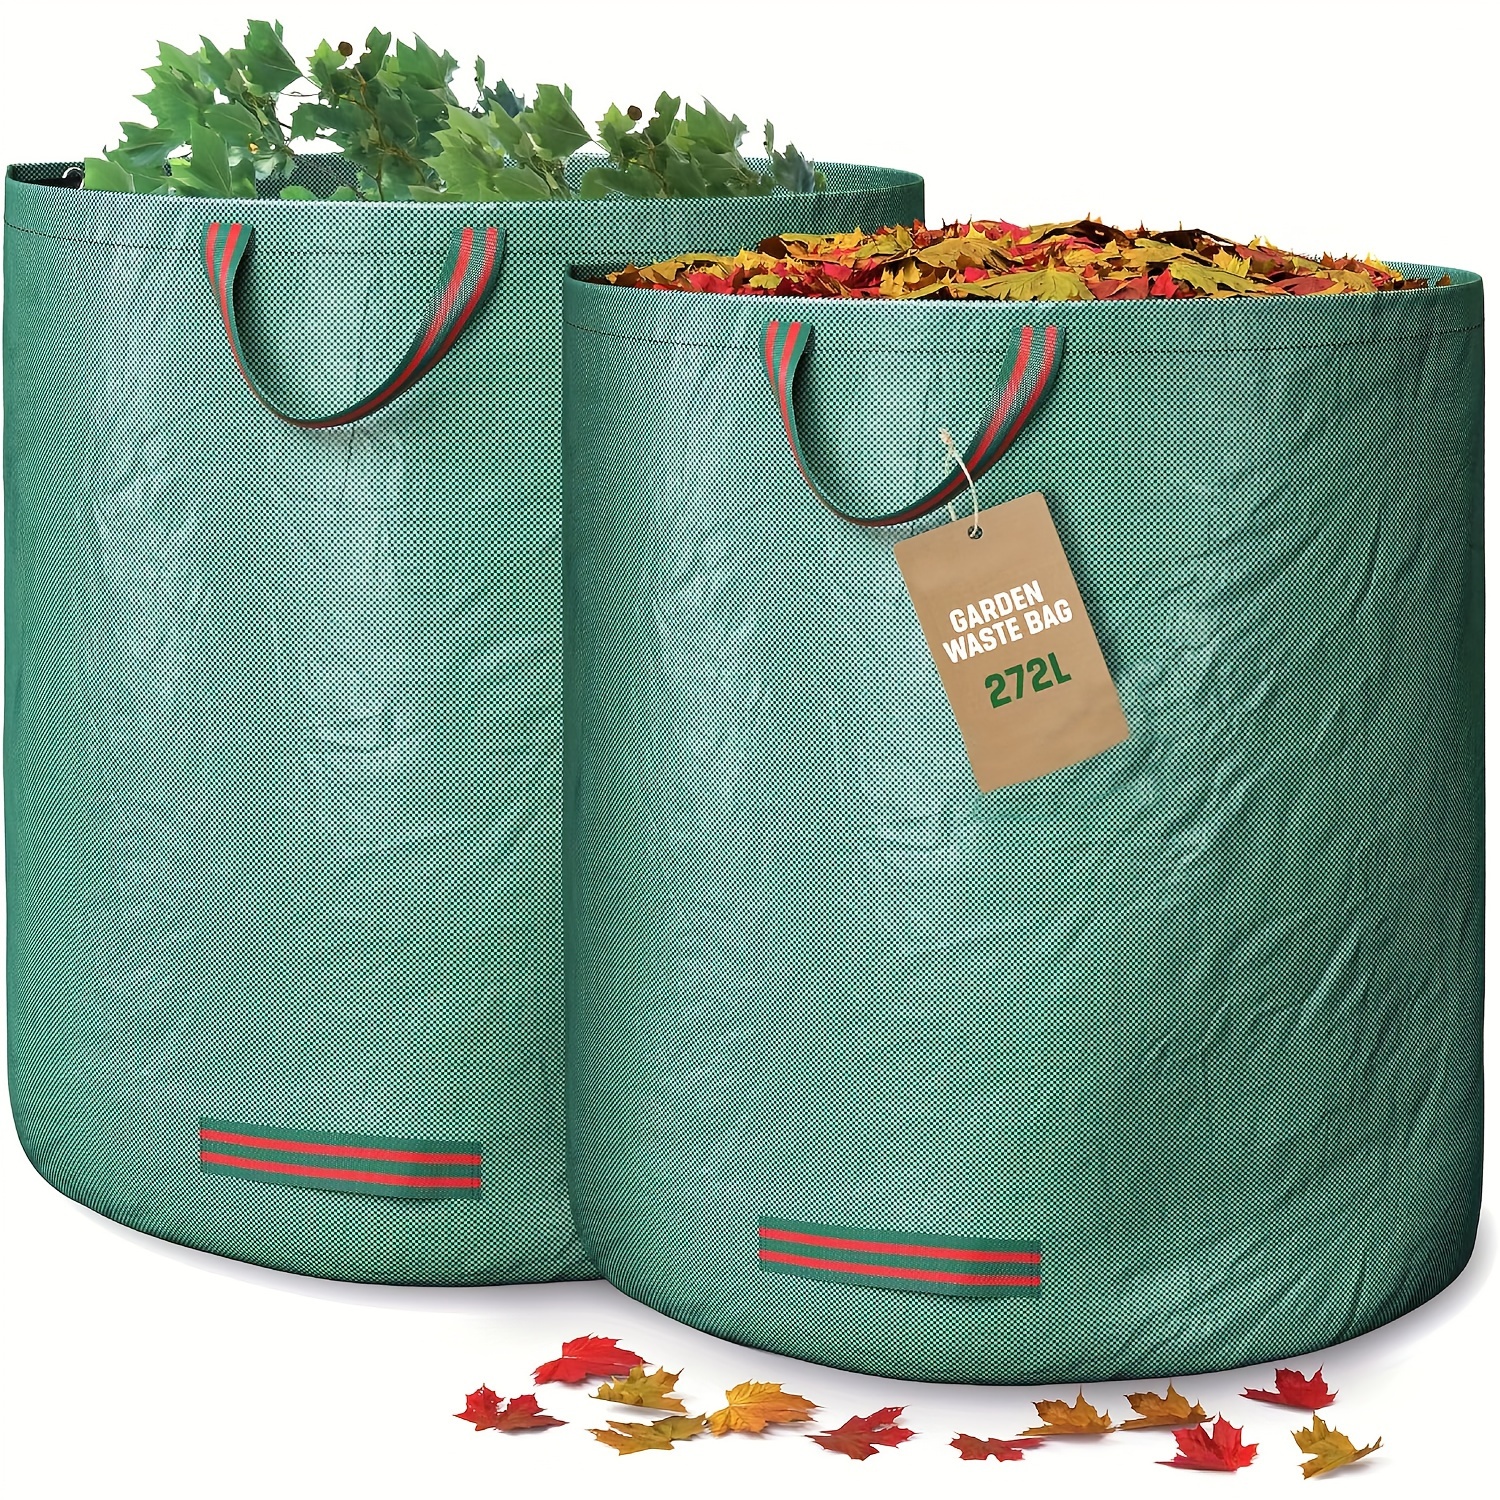 

2pcs Garden Waste Bags Heavy Duty With Handles, 272l High Capacity Garden Bag, Uv Stable And Water Repellent, Reusable